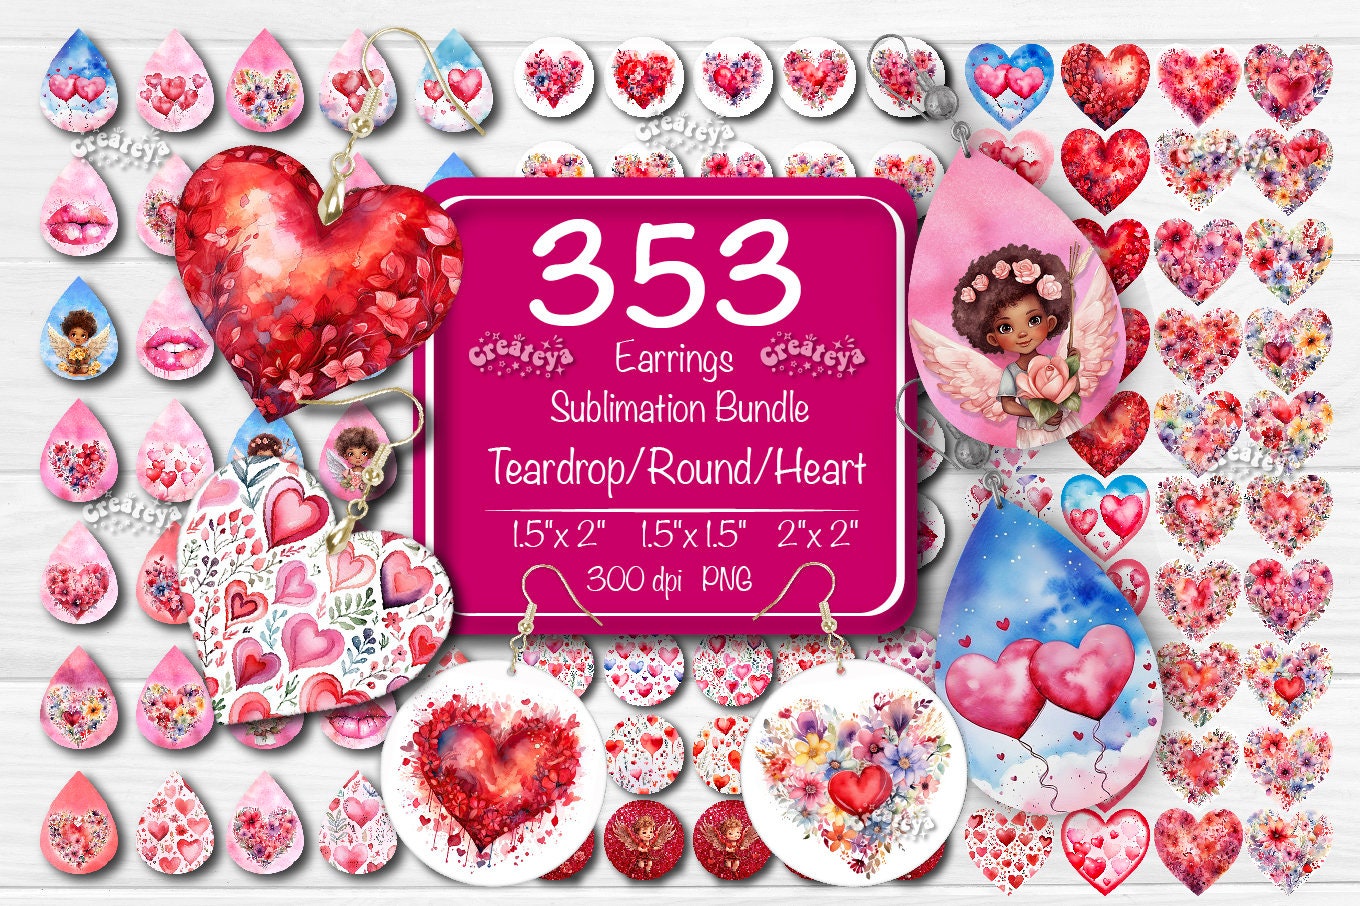 Sublimation Blank Heart Photo Bead Metal Products Slider Party European Charms Hot Transfer Printing Material Valentine's Day Gifts